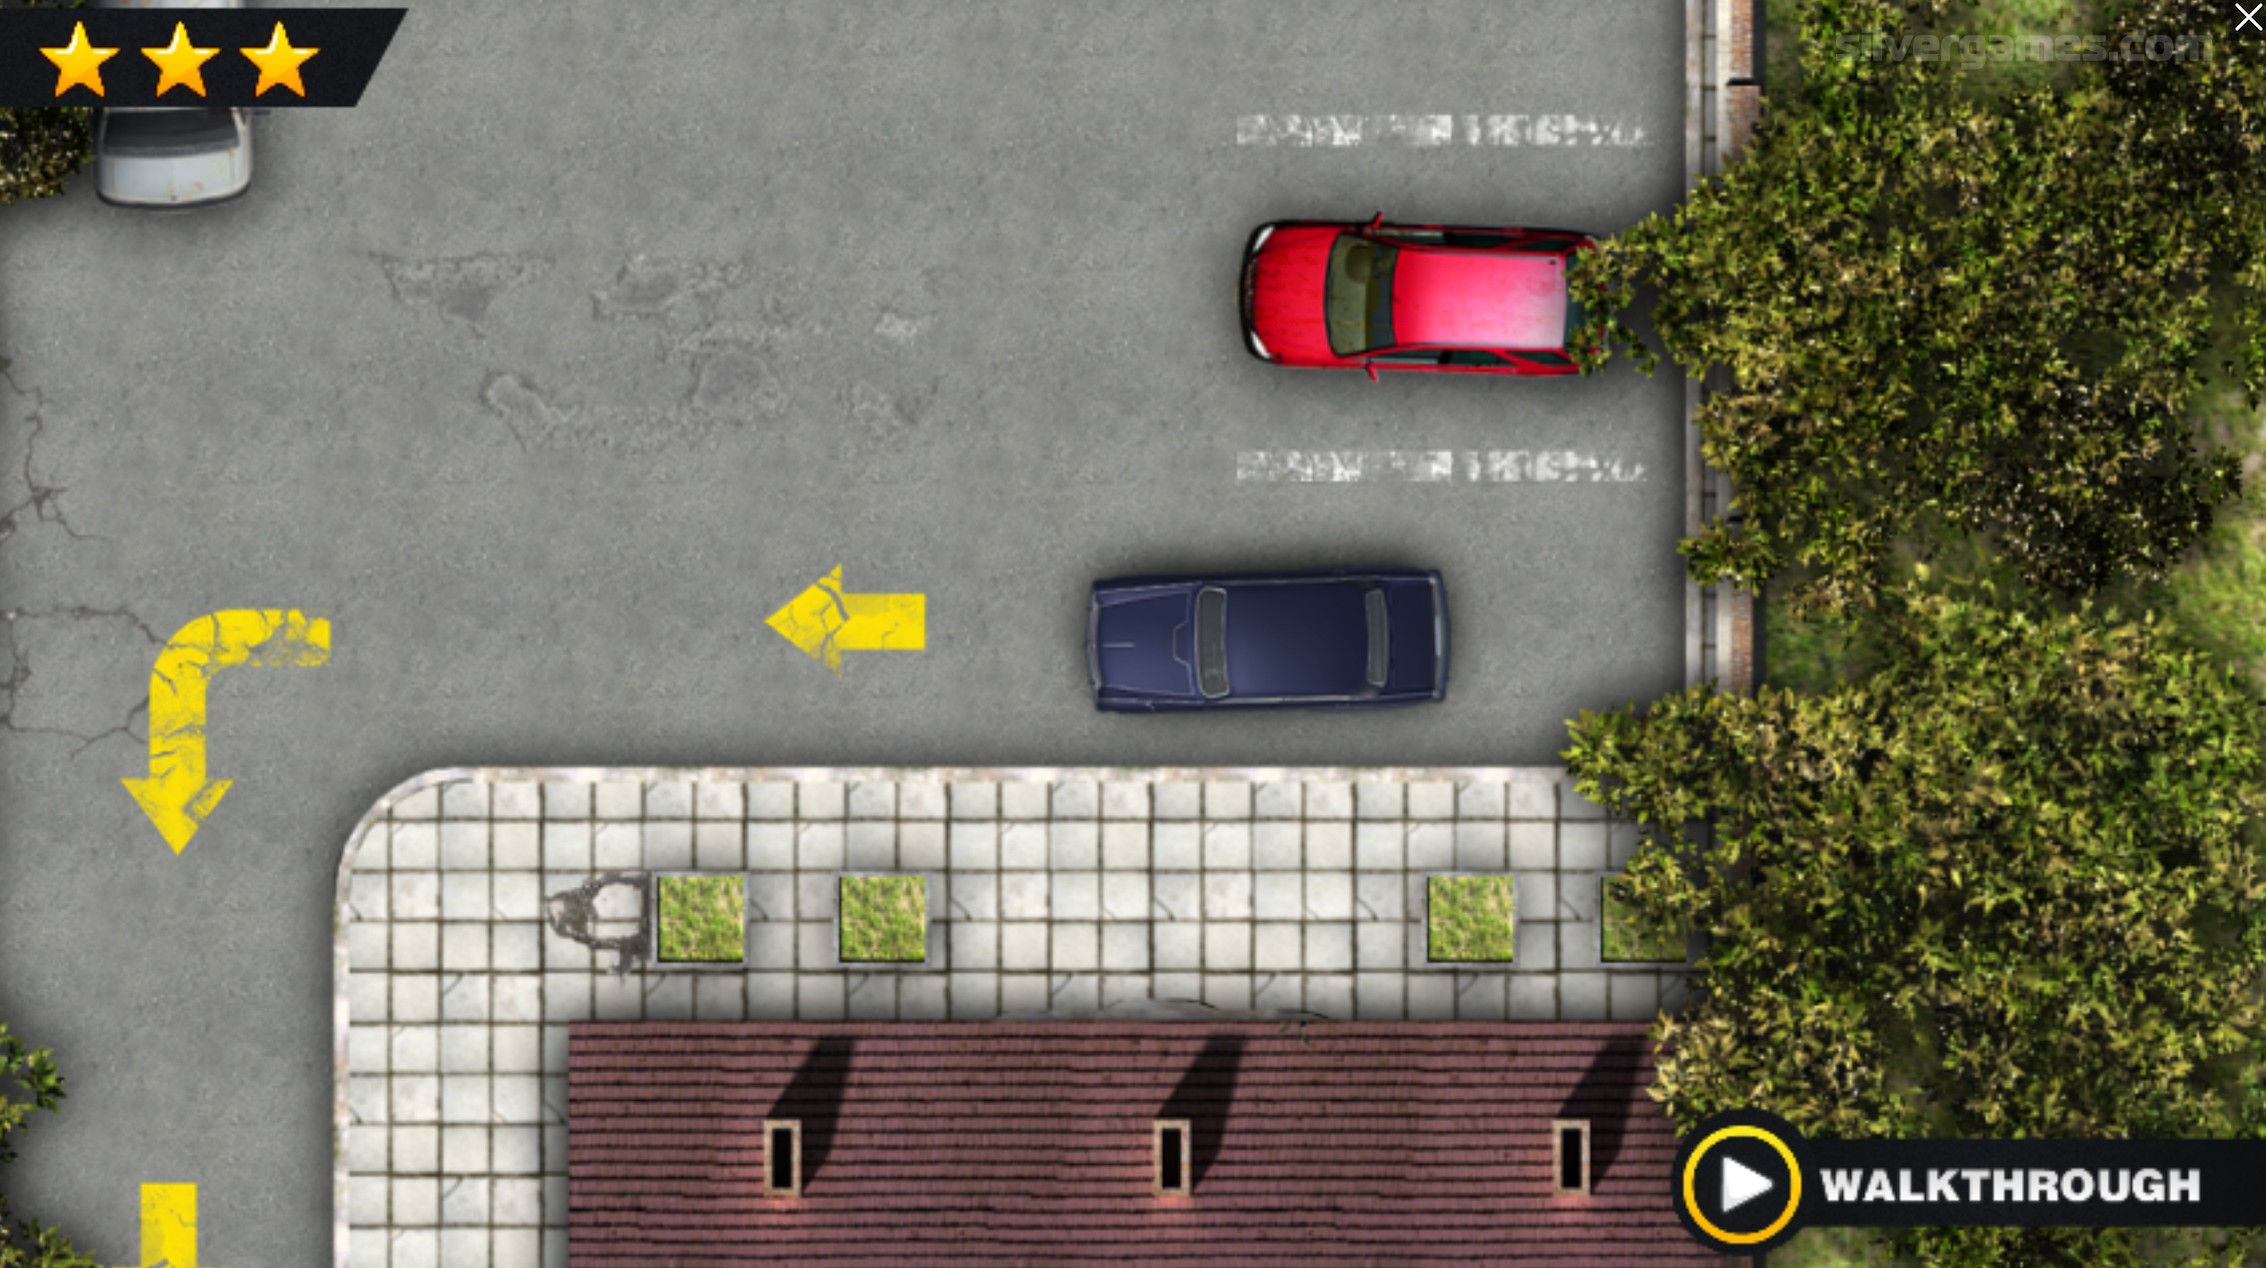 Parking Mania - Play it Online at Coolmath Games